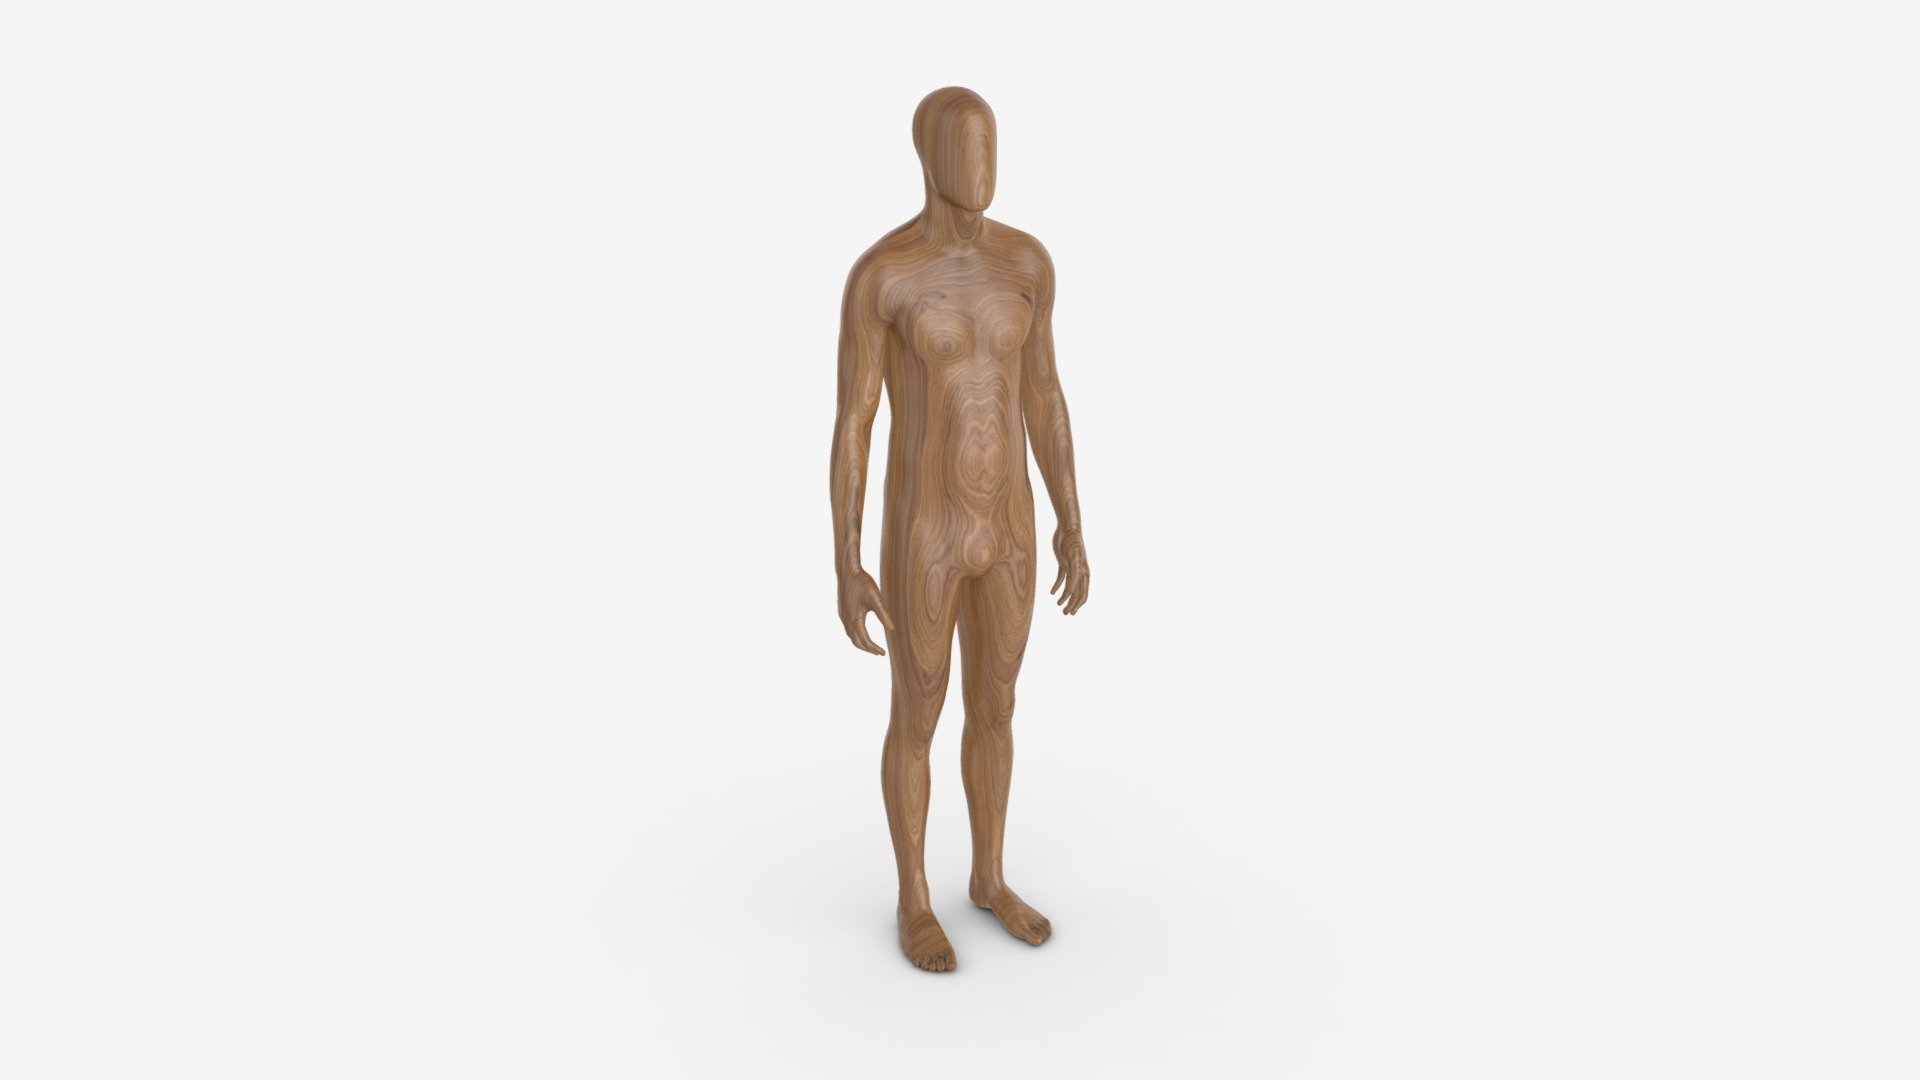 Male Full Body Mannequin Wooden Buy Royalty Free 3d Model By Hq3dmod Aivisastics Fb312bb 1457